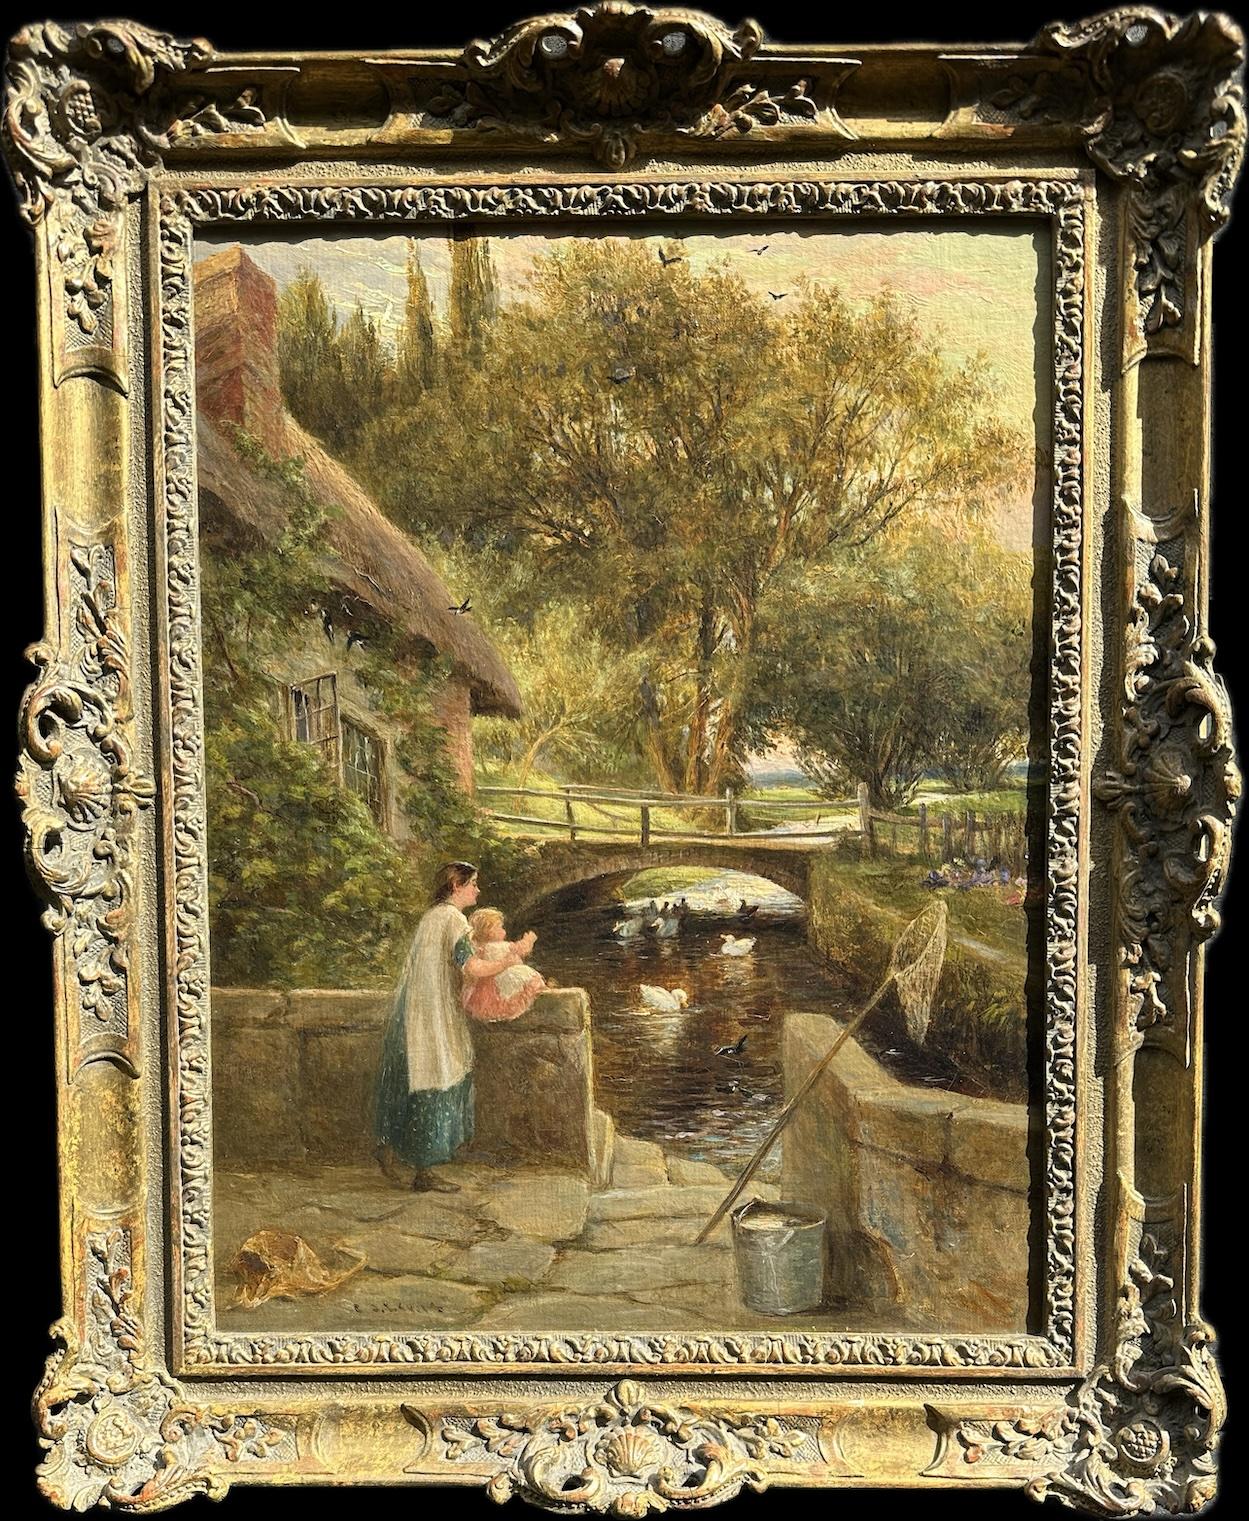 Charles James Lewis Figurative Painting - English landscape 19th century Mother and child by a cottage, looking at Ducks 